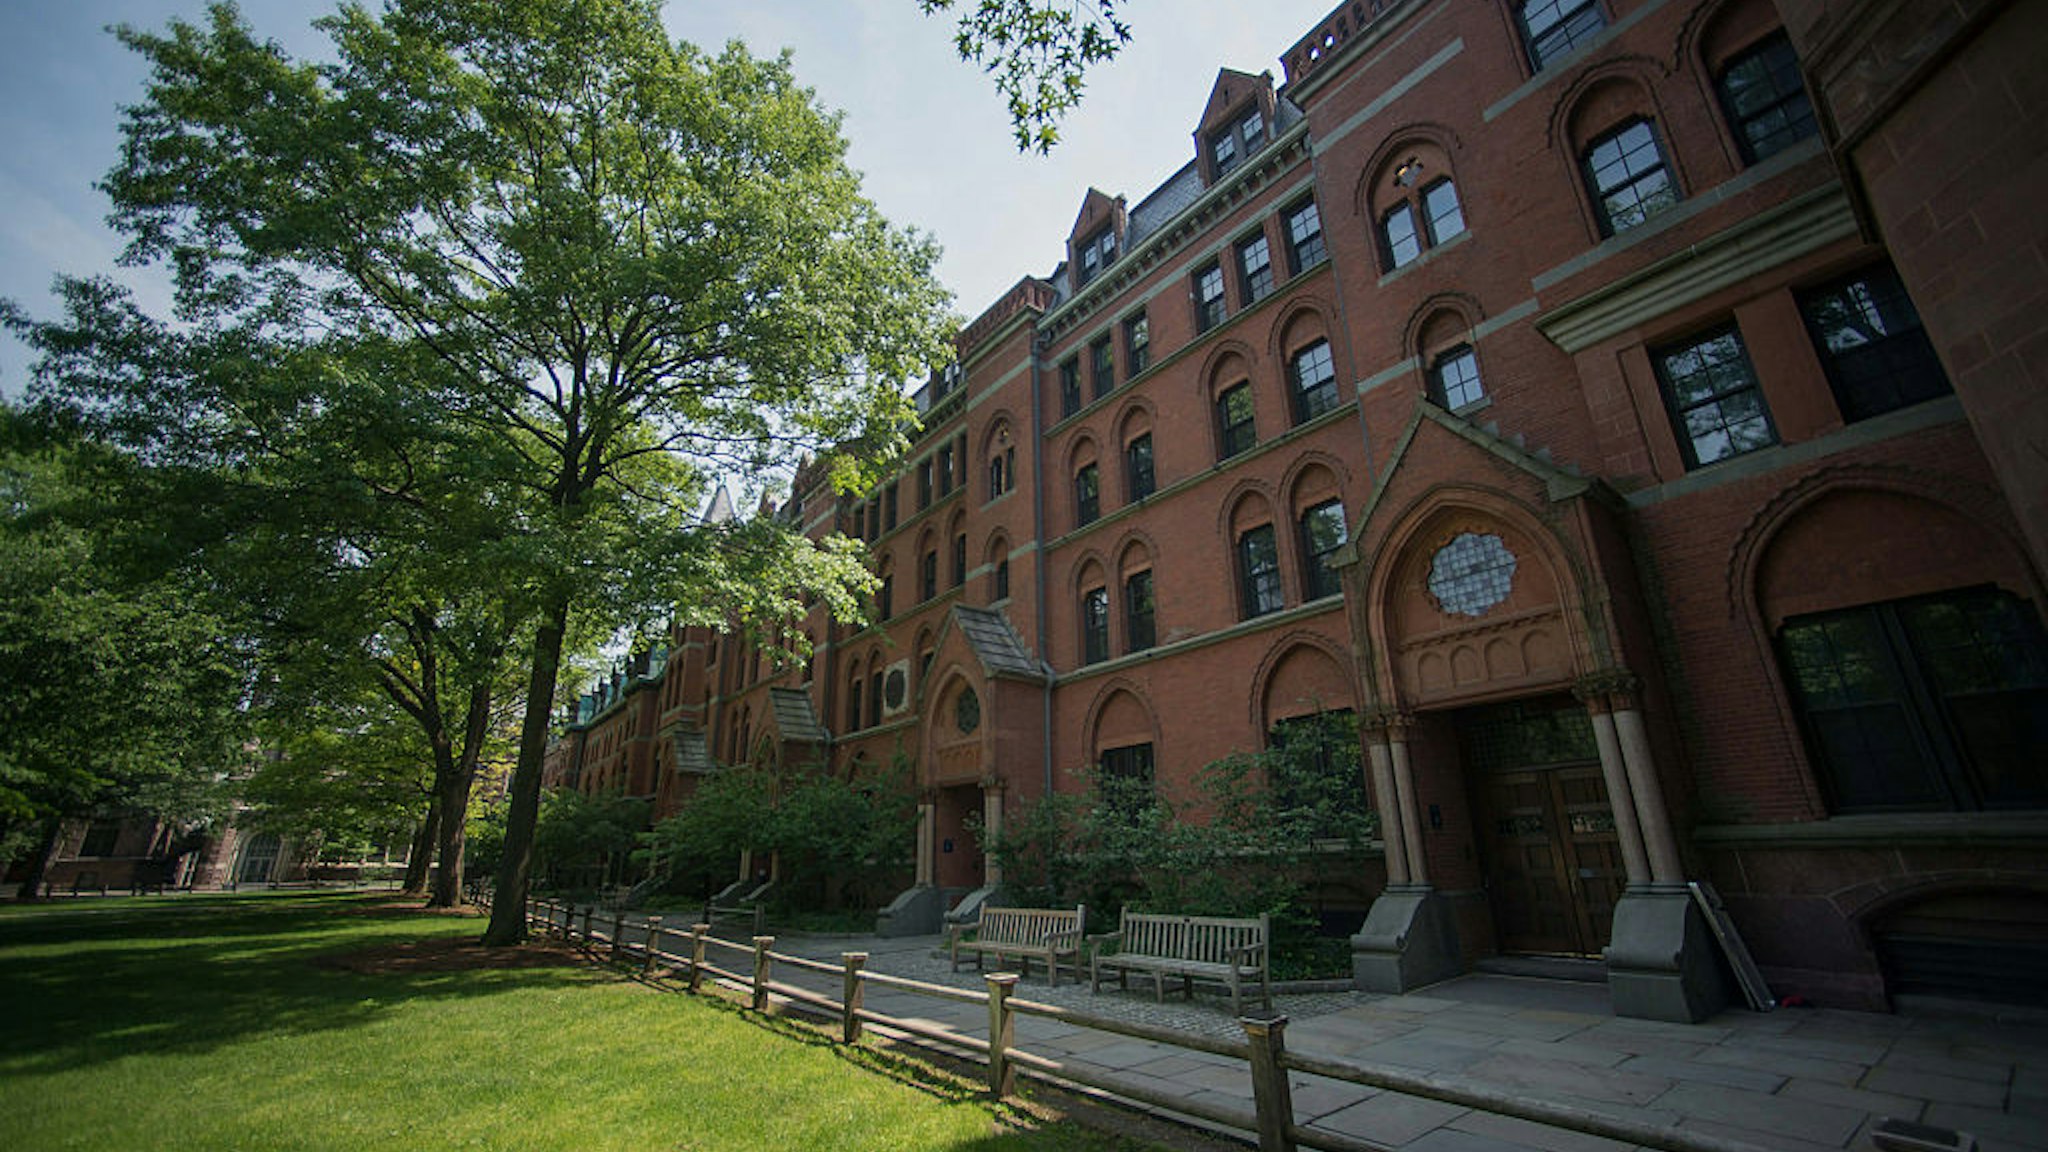 Buildings stand on the Yale University campus in New Haven, Connecticut, U.S., on Friday, June 12, 2015. Yale University is an educational institute that offers undergraduate degree programs in art, law, engineering, medicine, and nursing as well as graduate level programs.